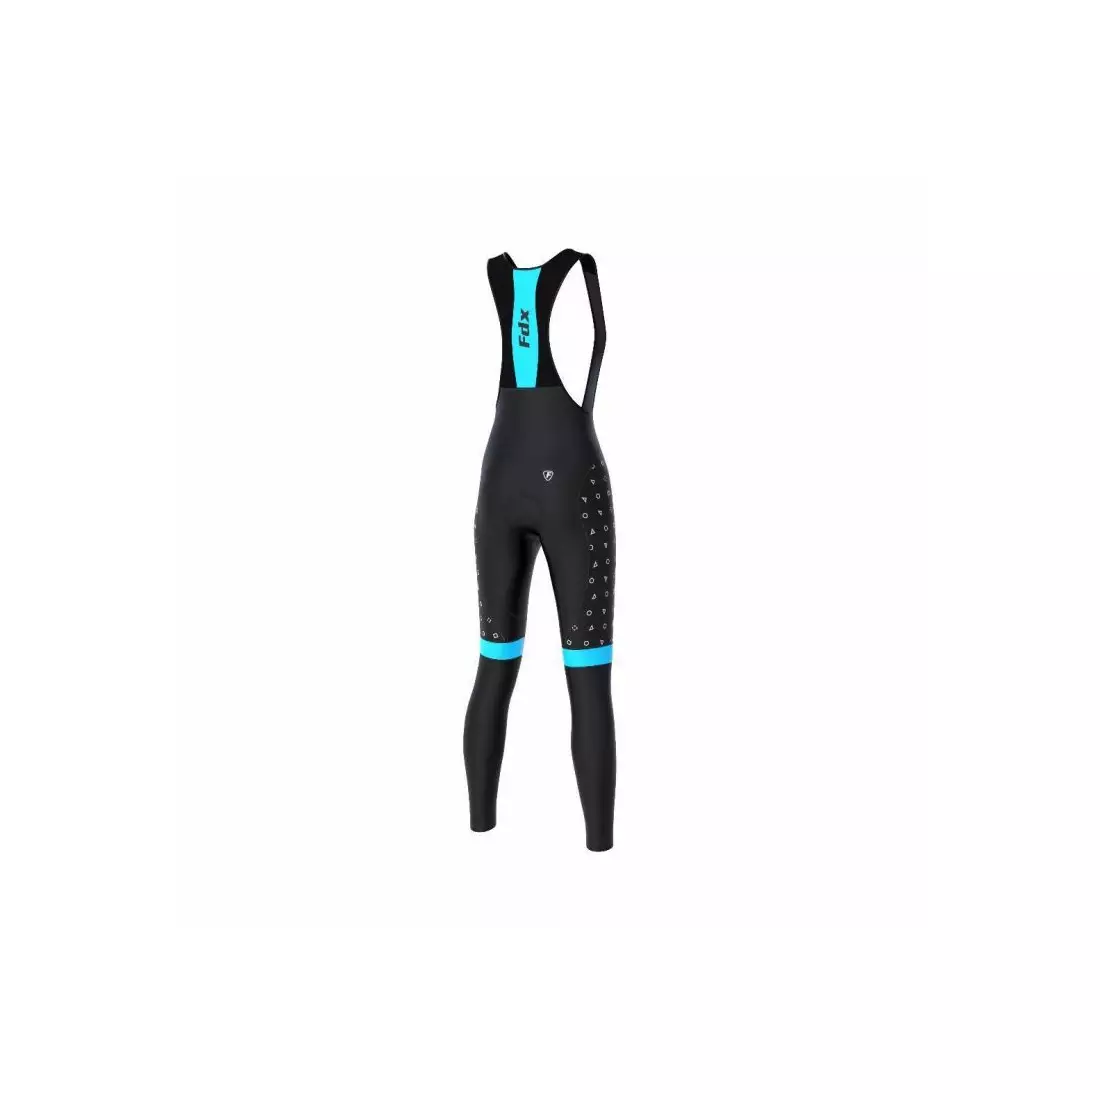 FDX 1490 women's insulated cycling trousers with suspenders, black and blue